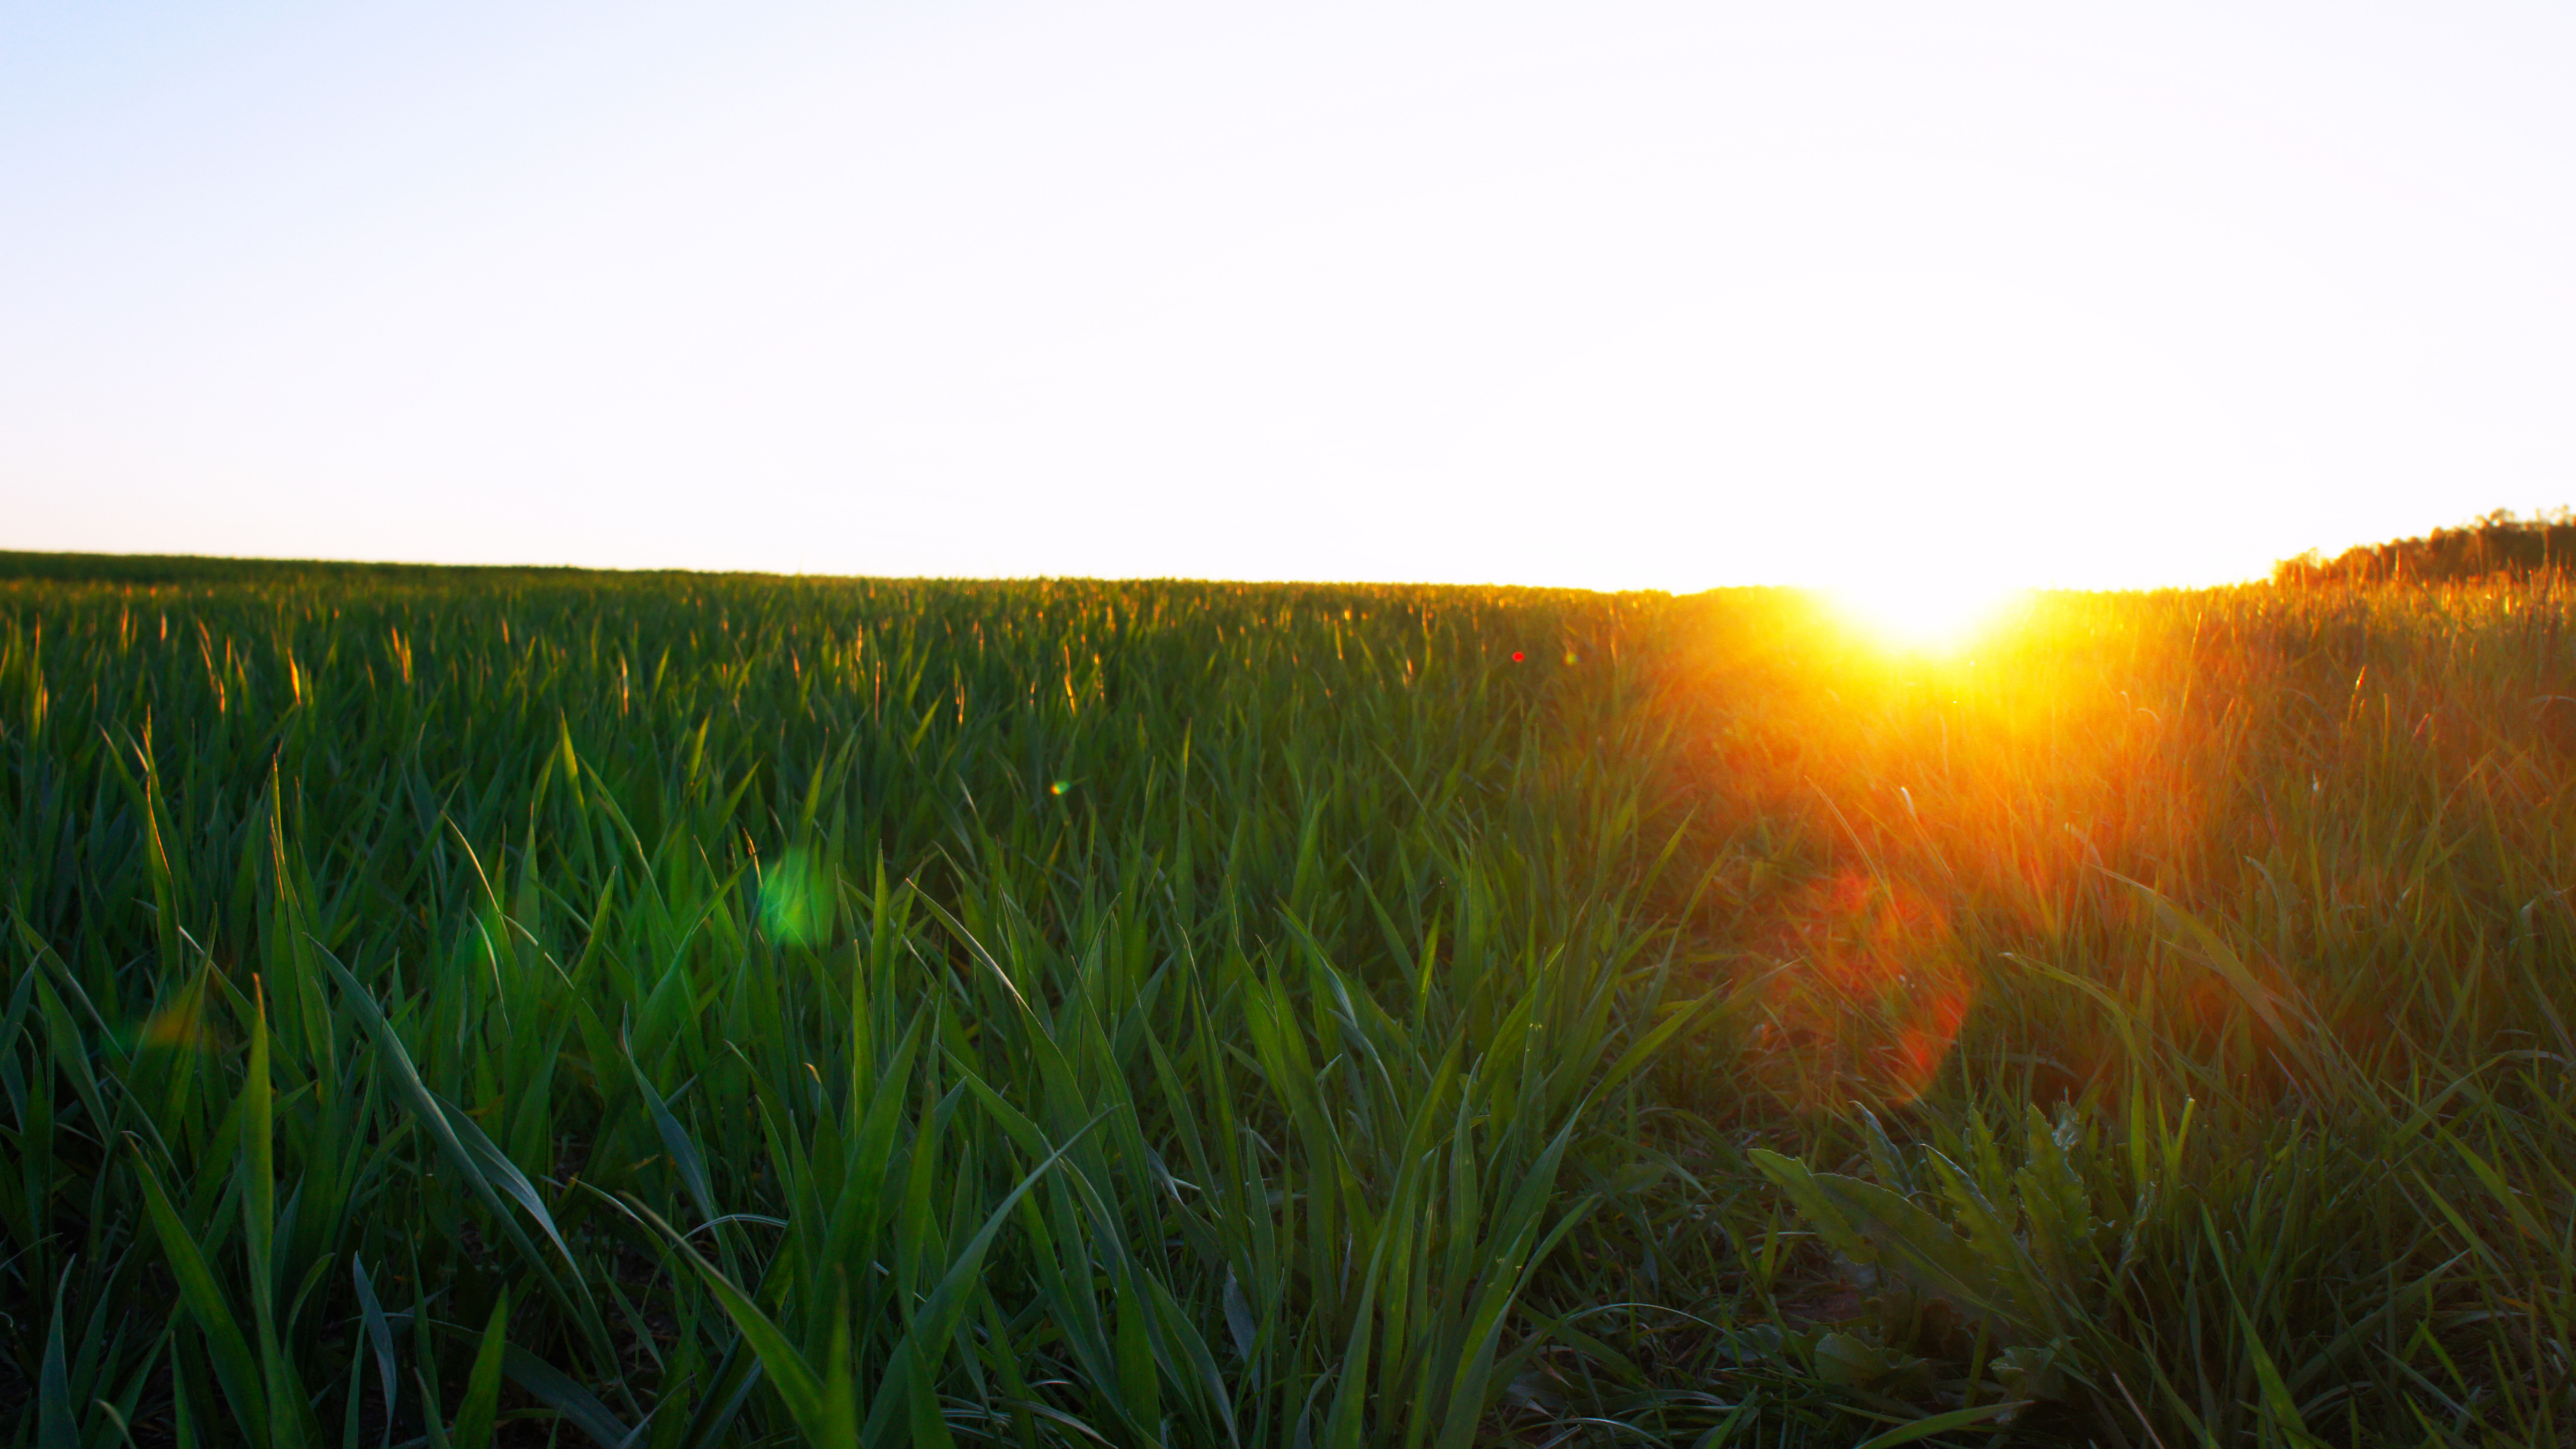 A field of green grass with a burst of sunlight peeking over the horizon in the distance.